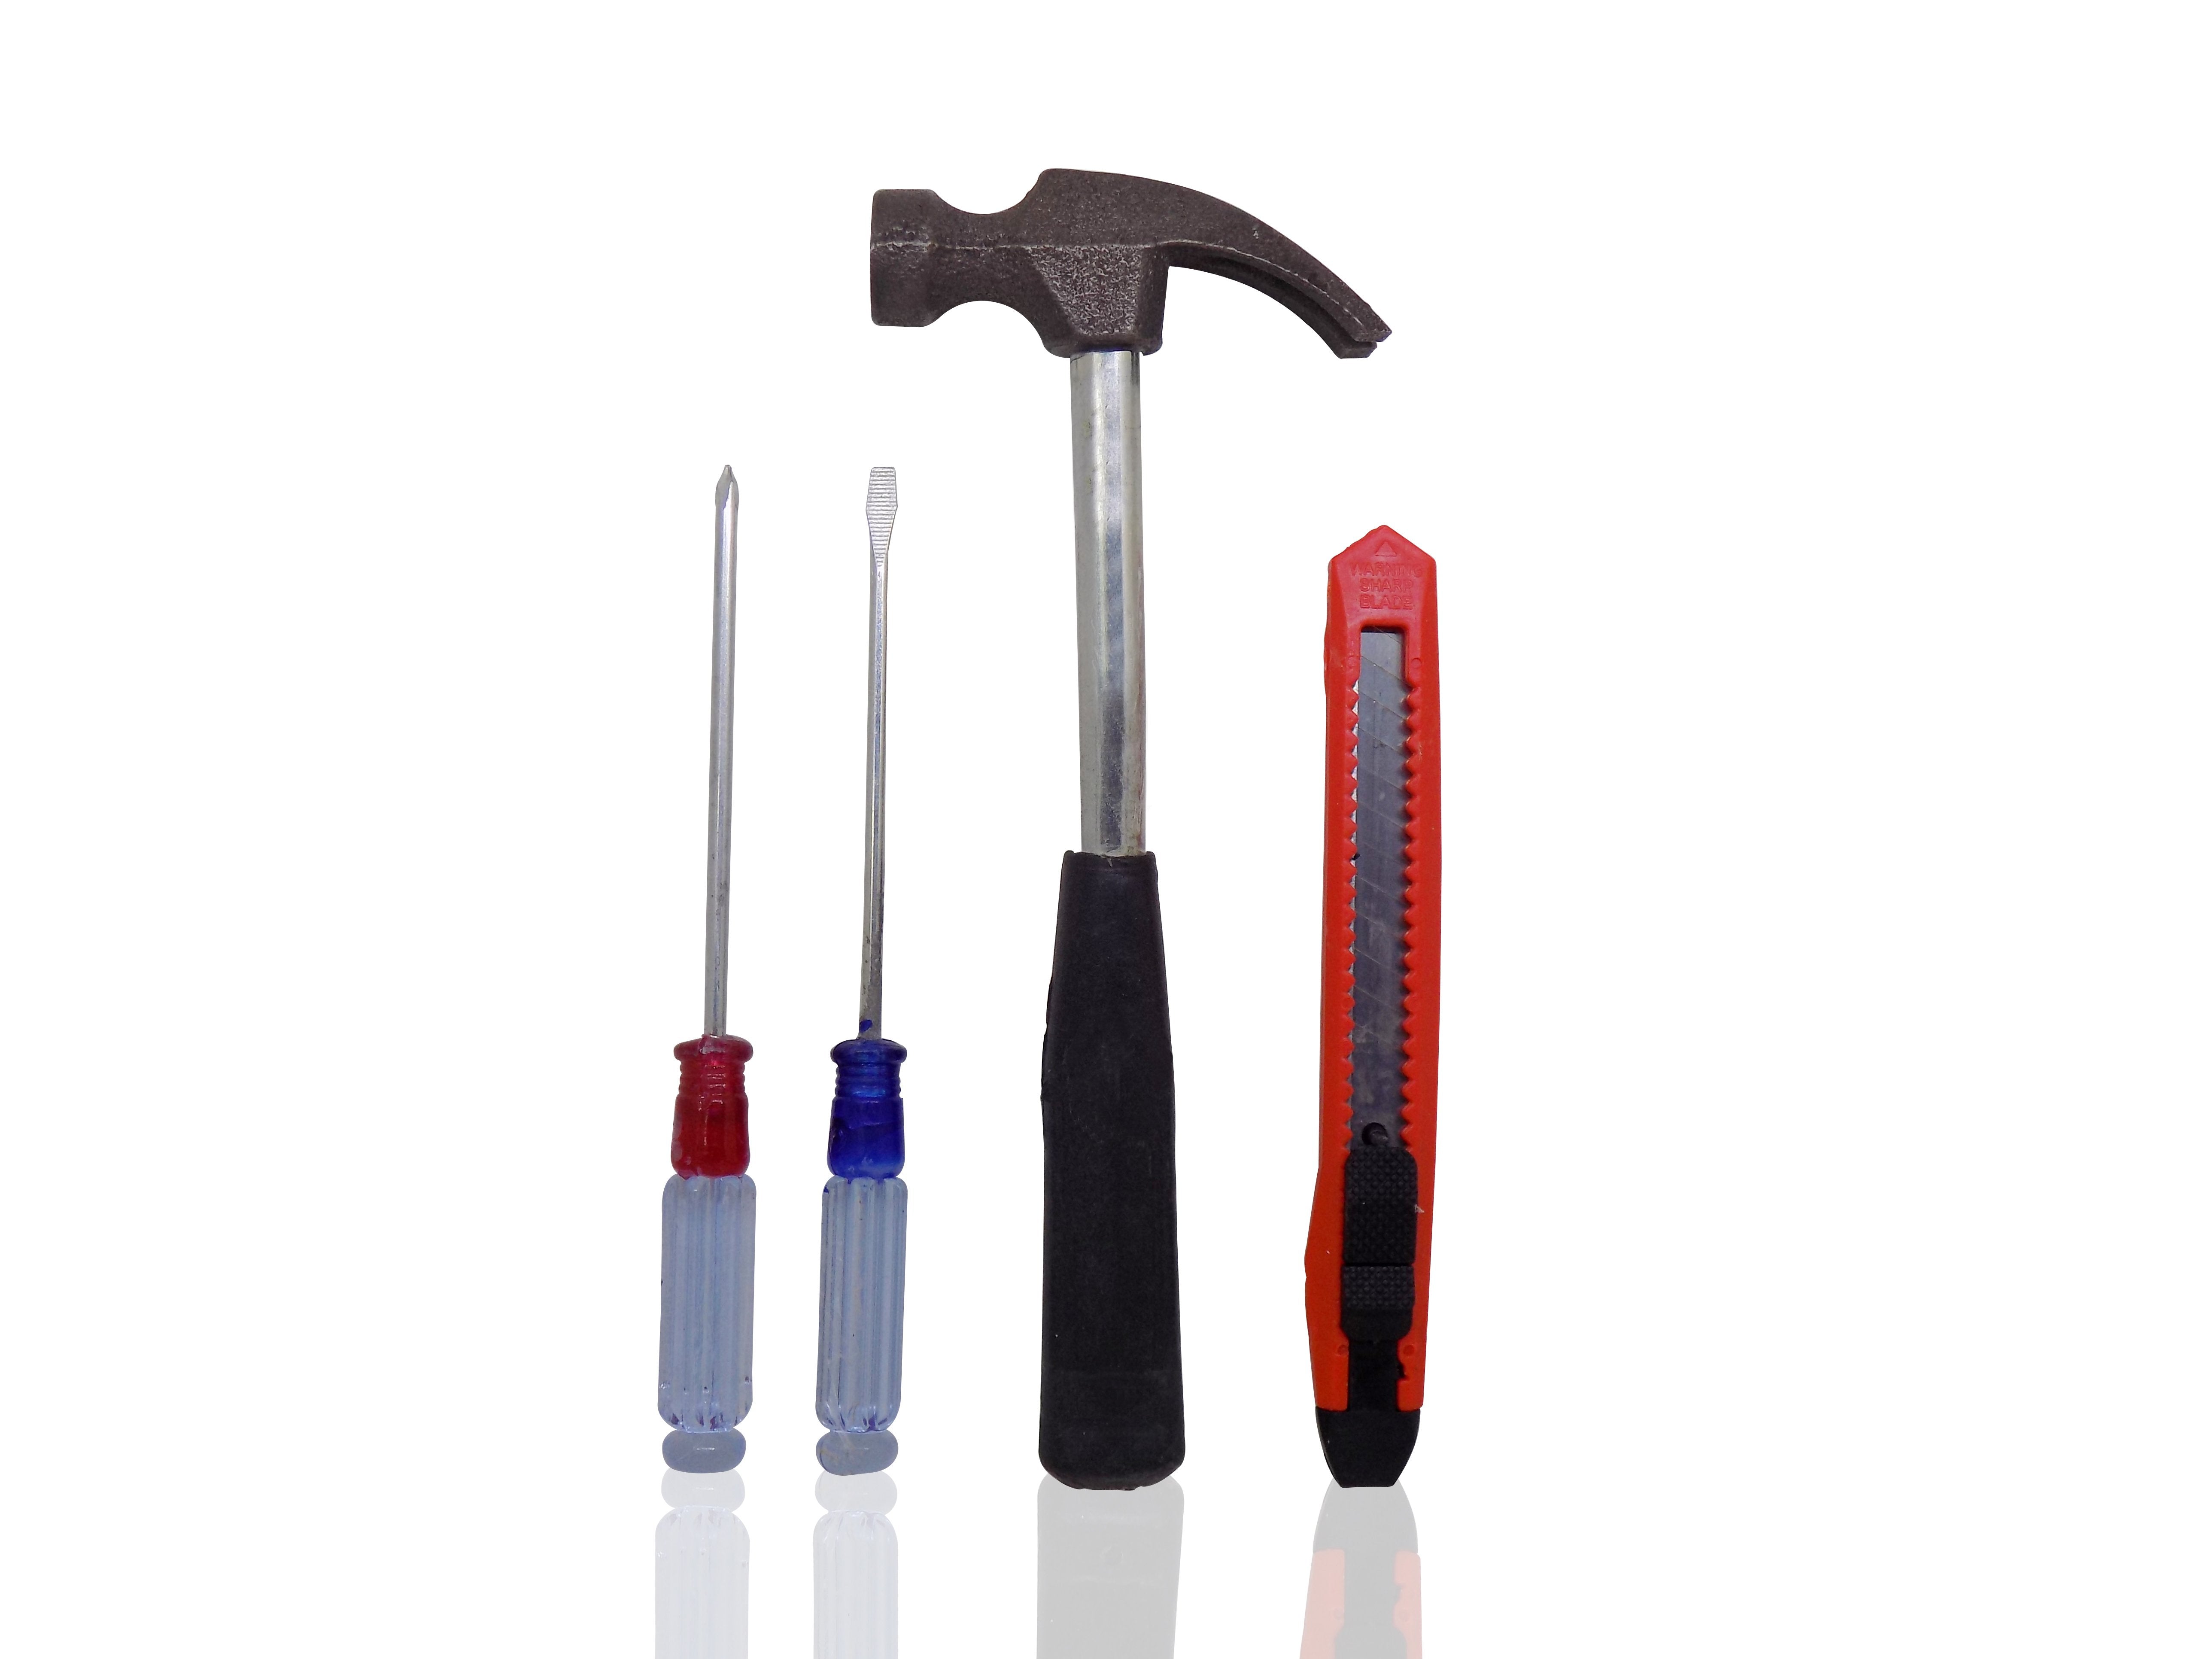 0498 Professional Utility Cutter Set- 4pcs ( Screw Drivers, Hammer and Cutter) - SkyShopy